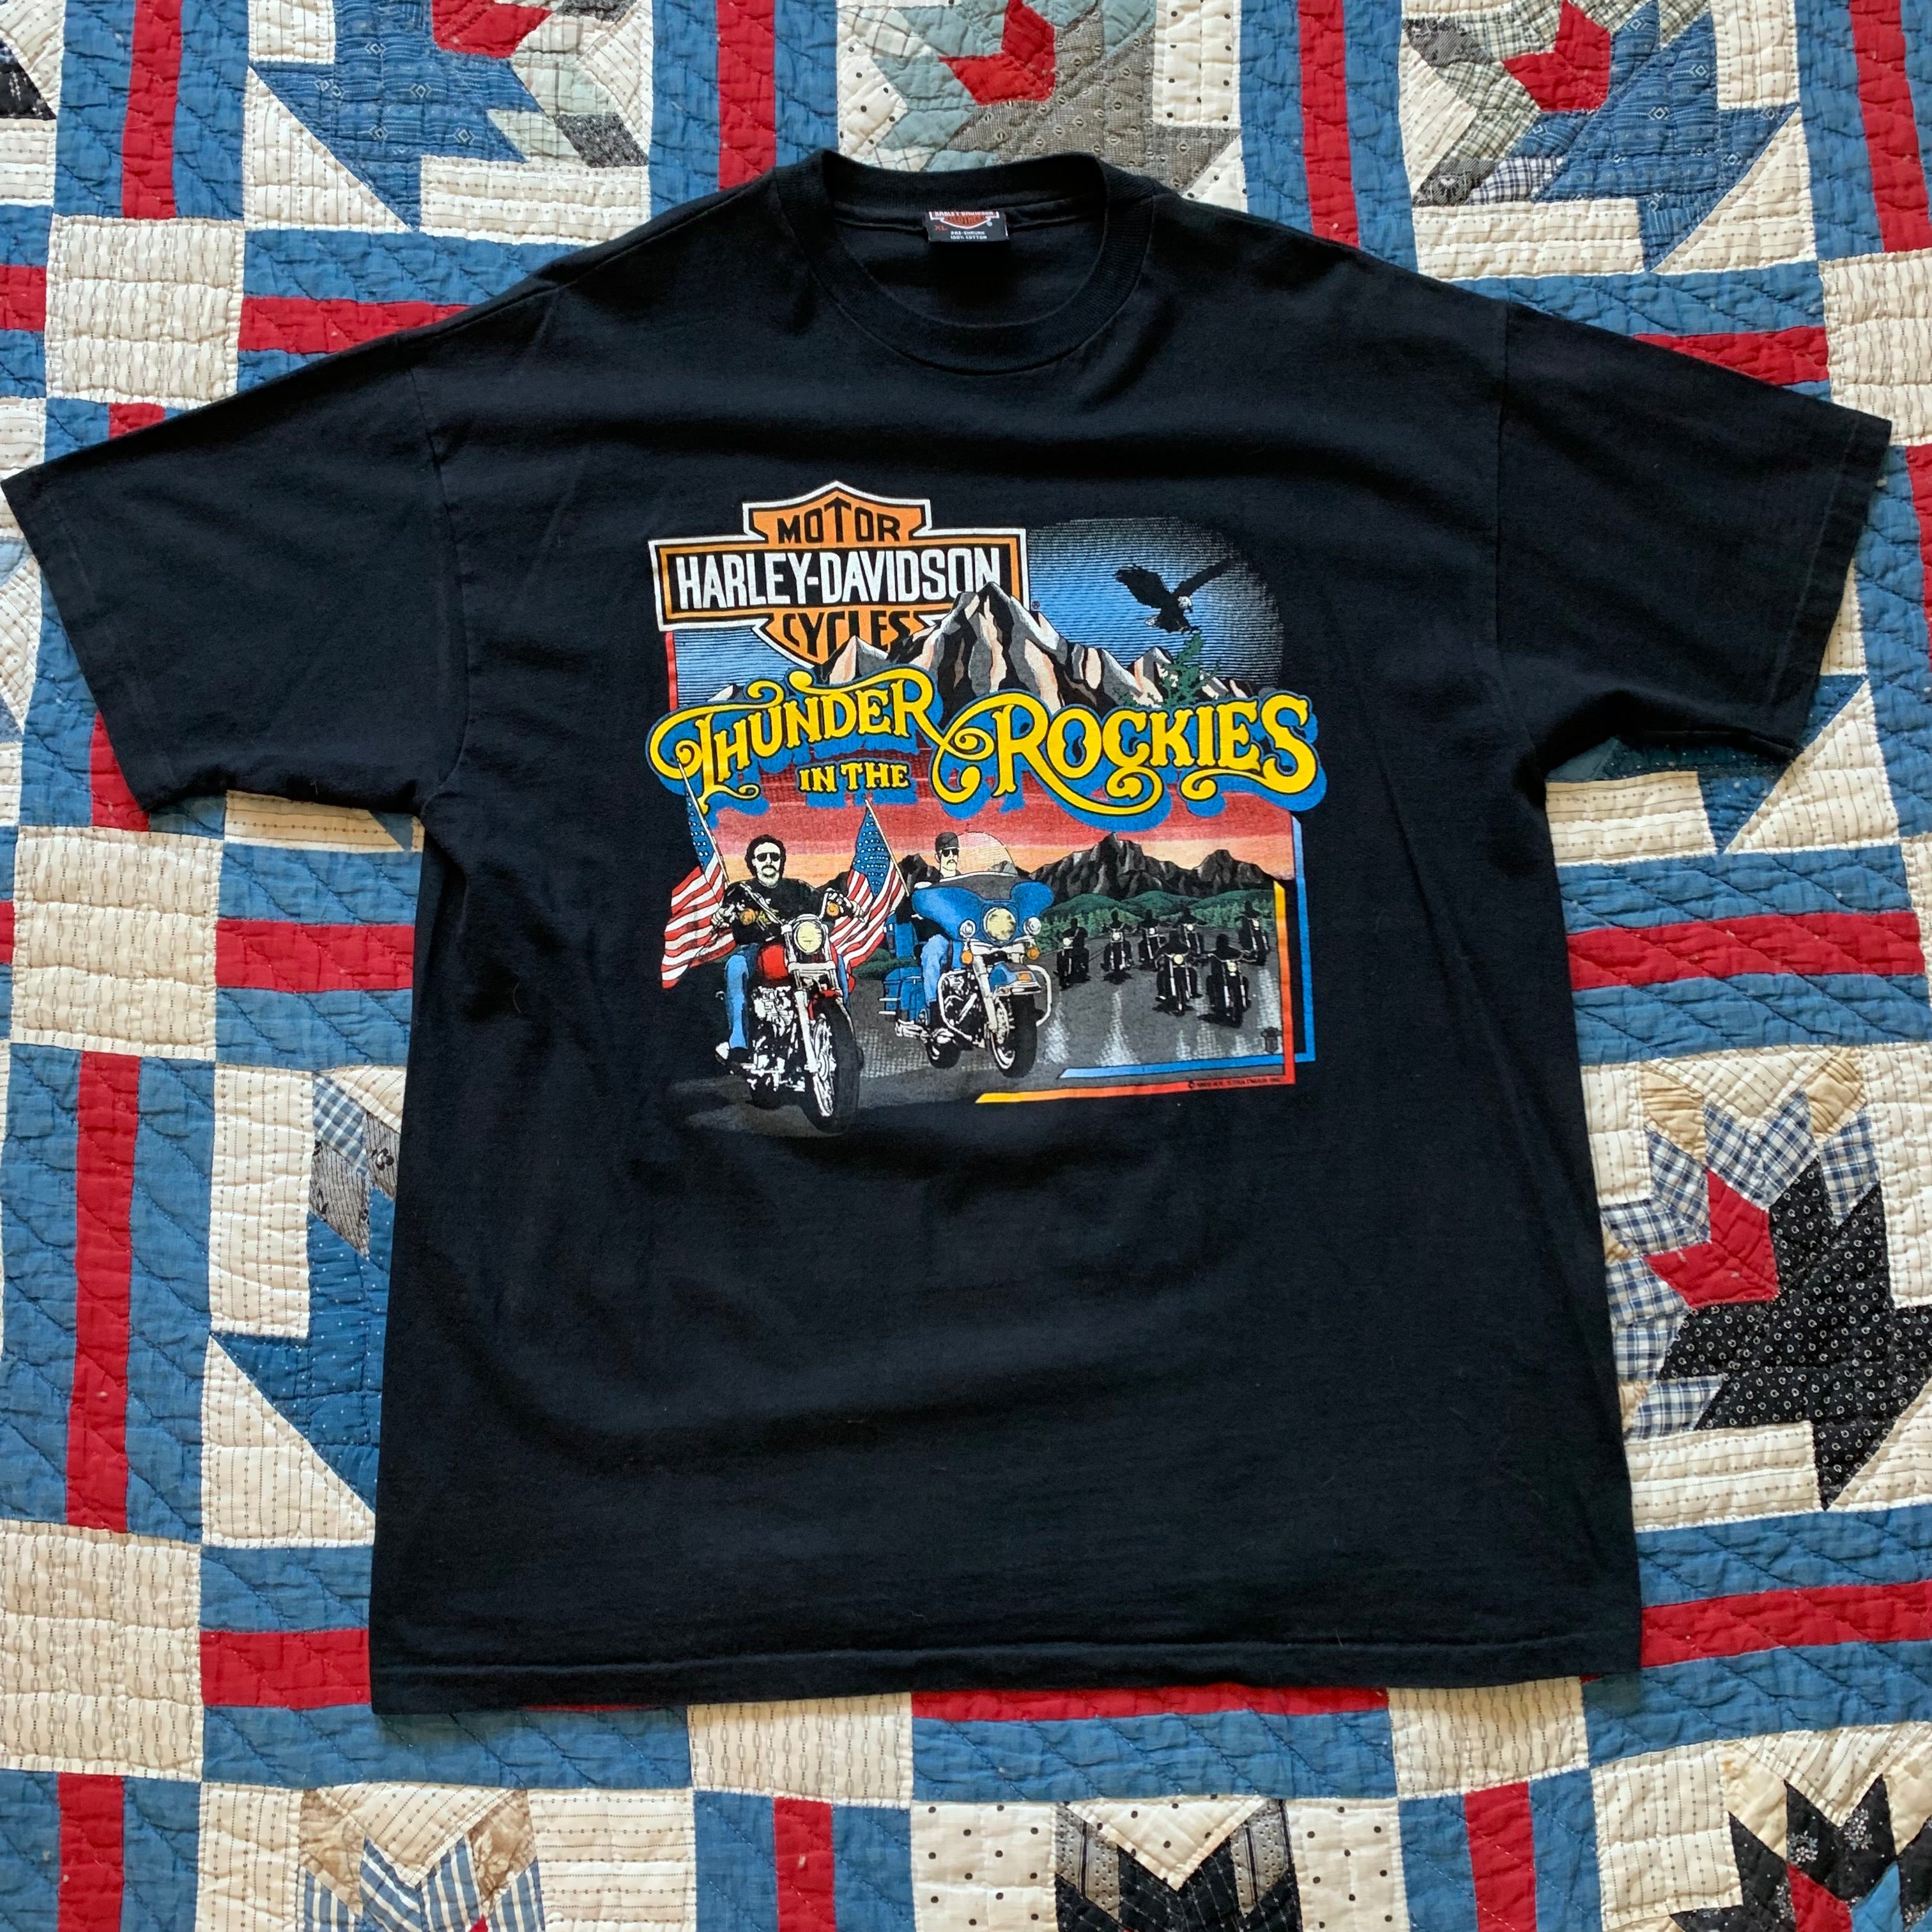 Grateful Dead Colorado 1980 Tour Shirt High in the Rockies 